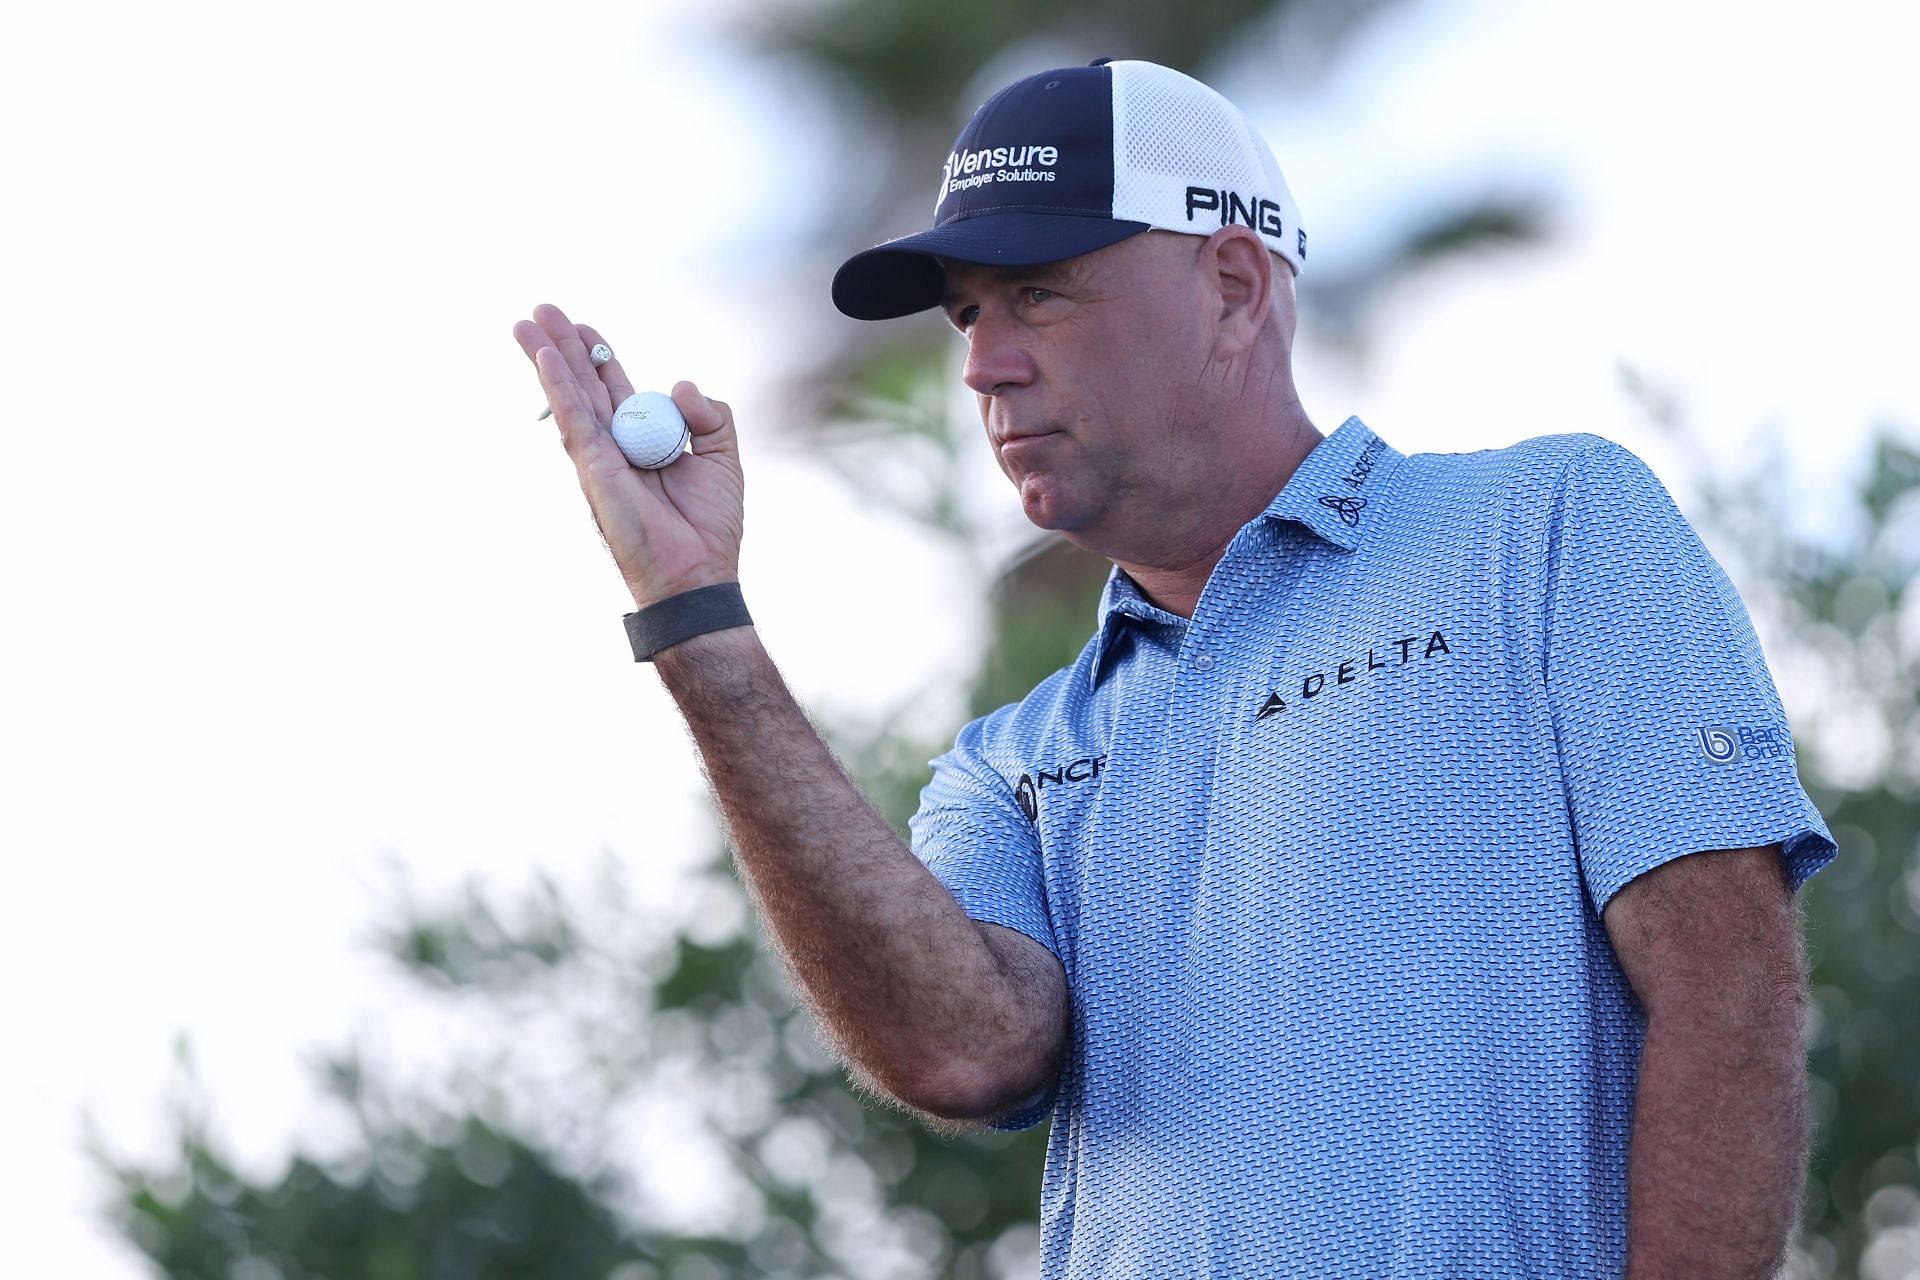 Stewart Cink opened up on the PGA Tour changes